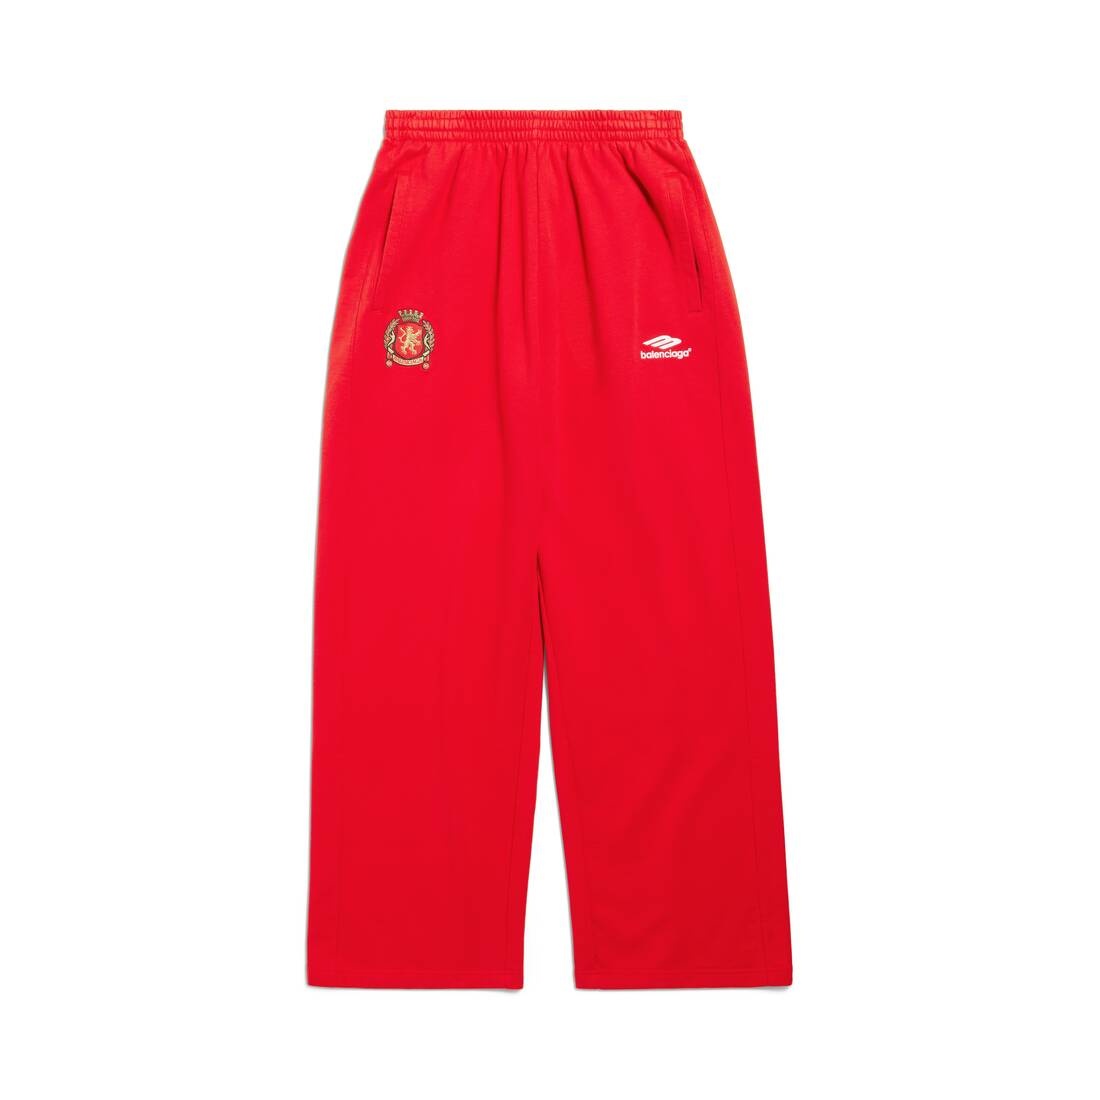 Soccer Baggy Sweatpants in Red/white - 1